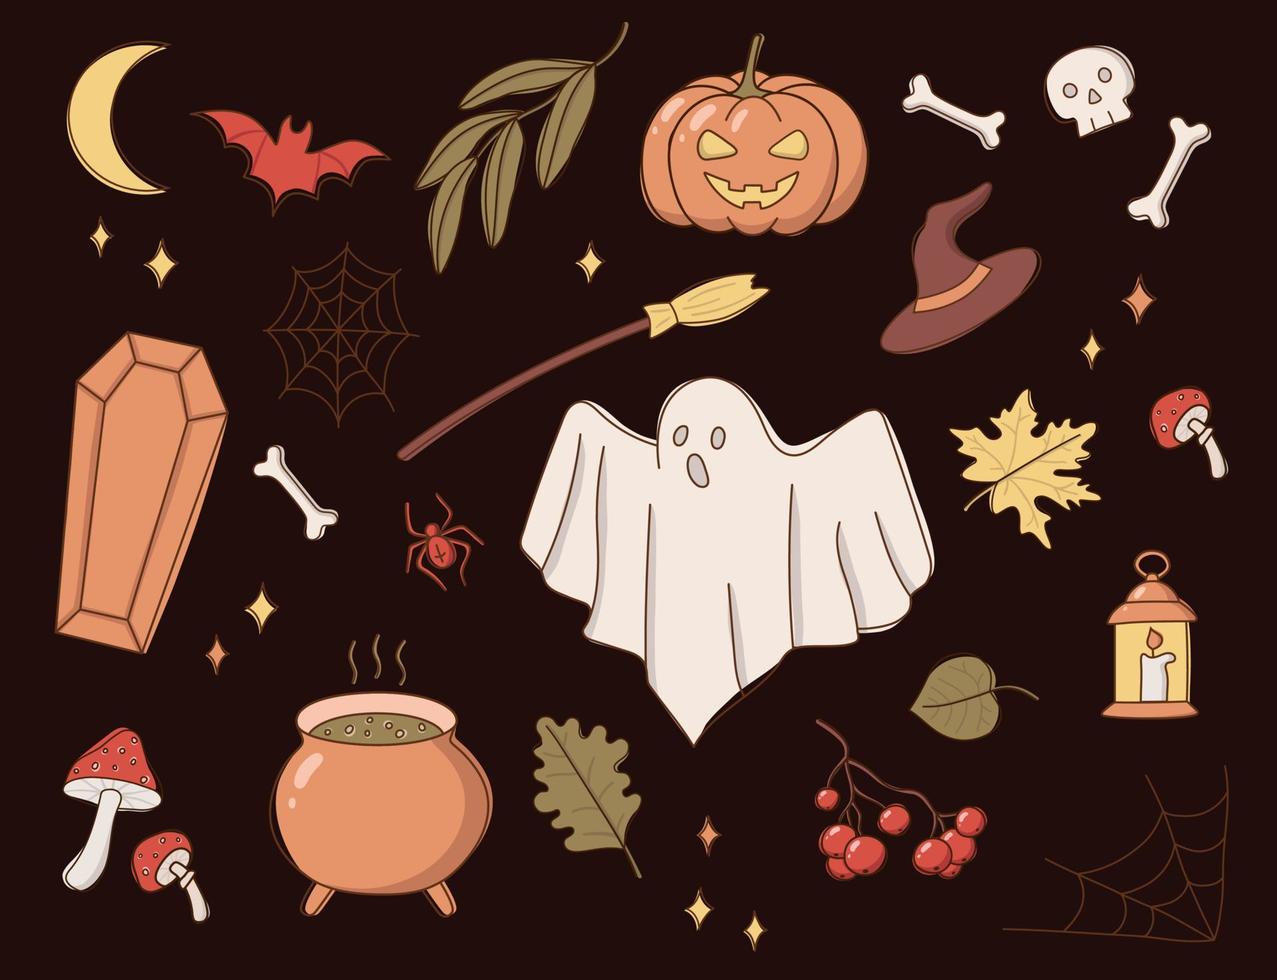 Vector collection of autumn halloween icons. Pumpkin, ghost, moon, bat, spider, pot, sceleton, rowan, leaves, mushrooms, web, candle, coffin, broomstick, bones. October set of holiday season elements